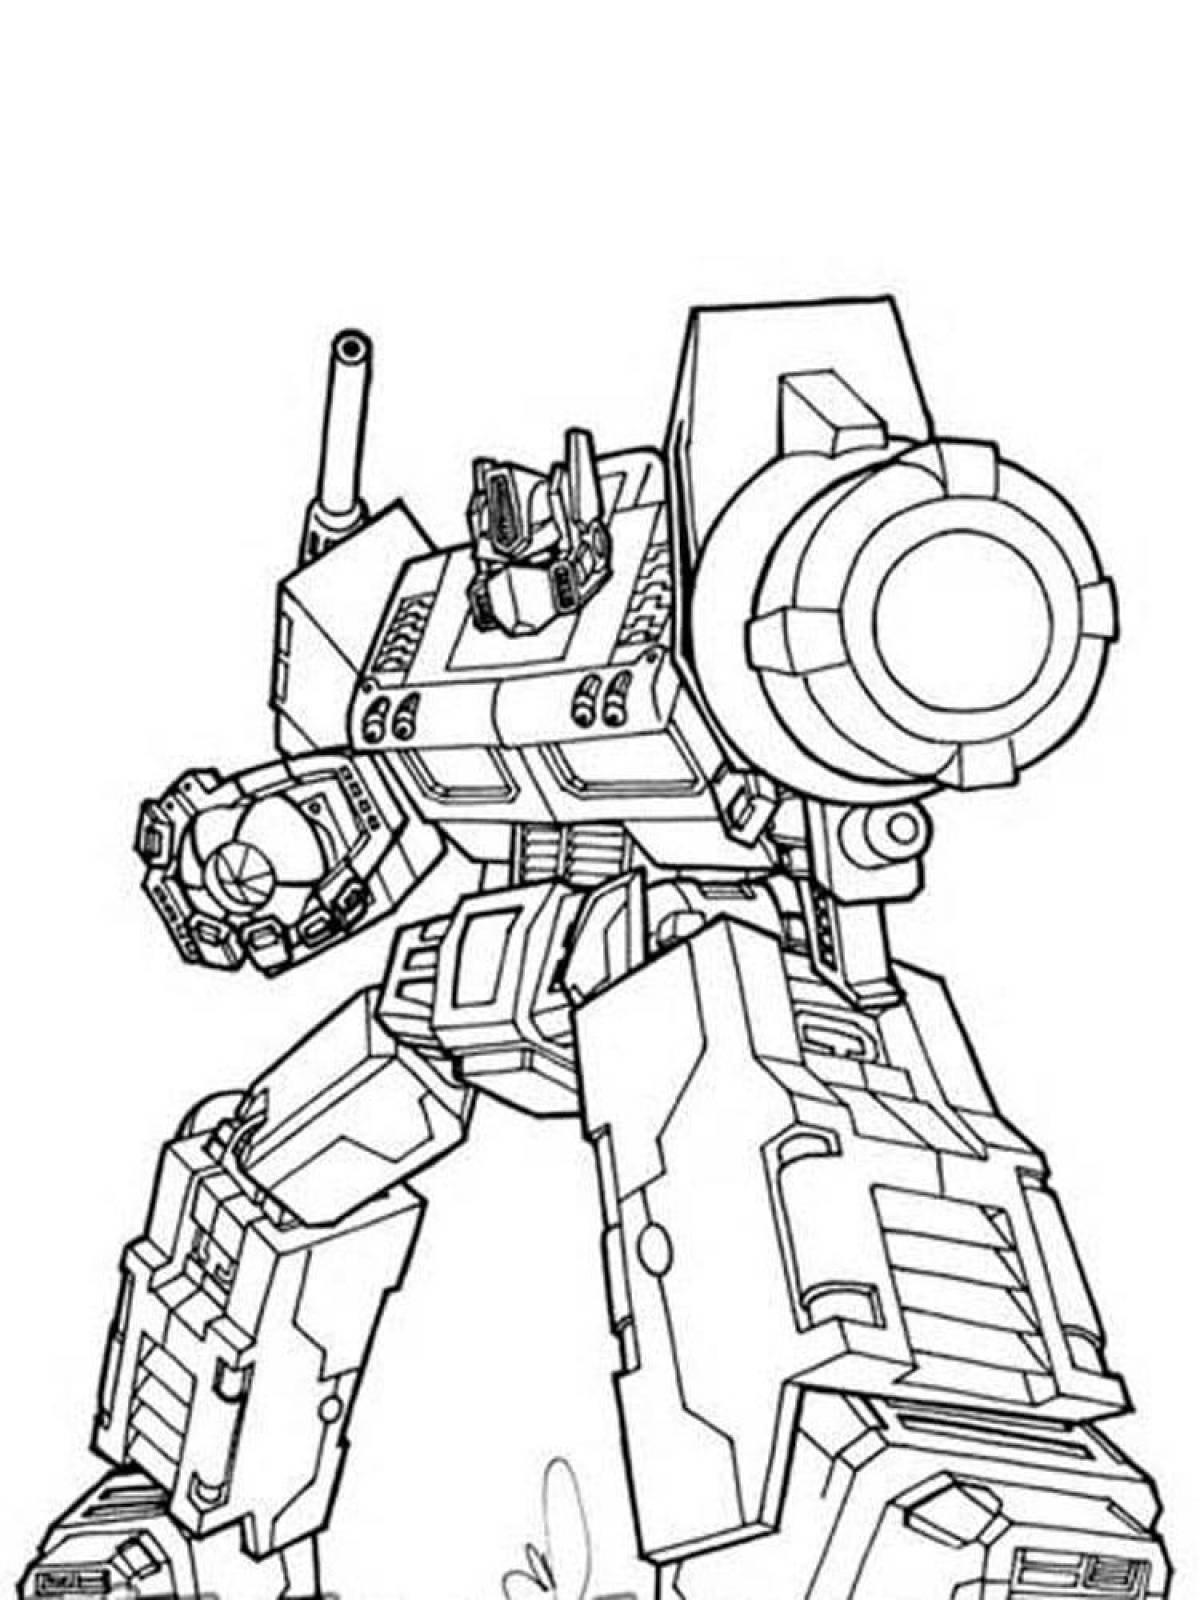 A fun coloring book for kids with Optimus Prime